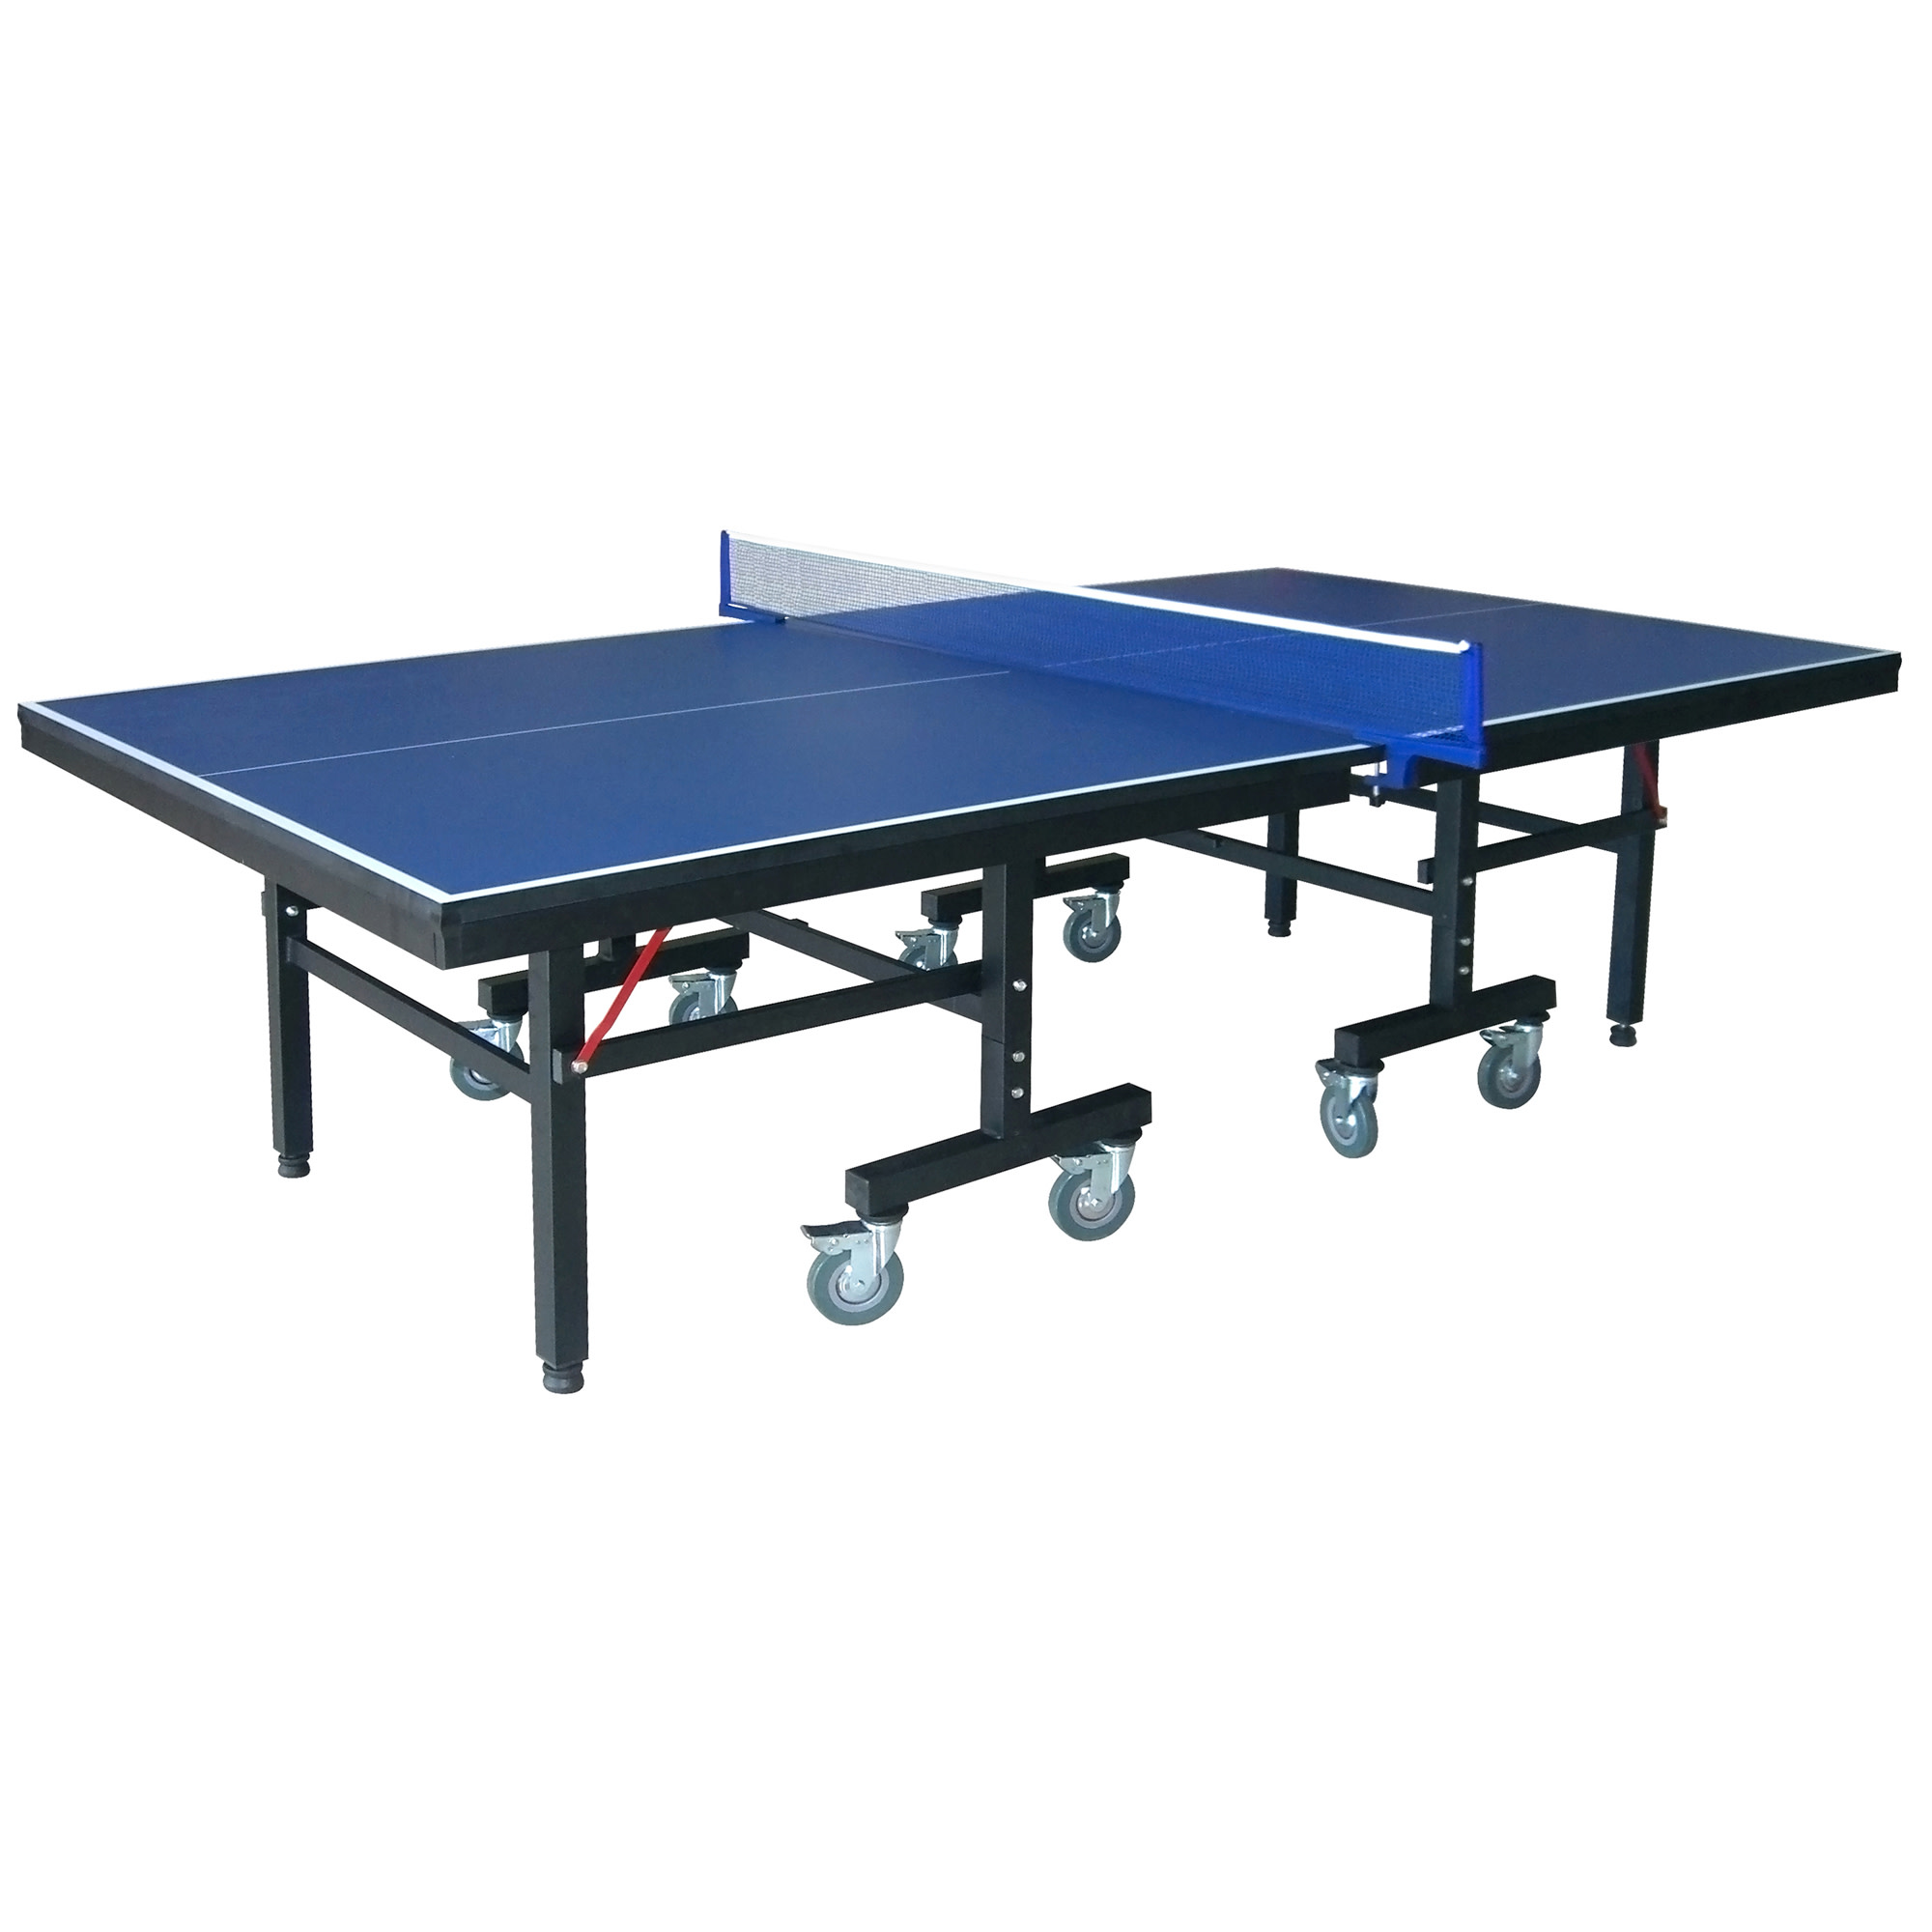 Hathaway Victory 25mm Table Tennis Table w/Two Carriage Transport, Blue - image 1 of 12